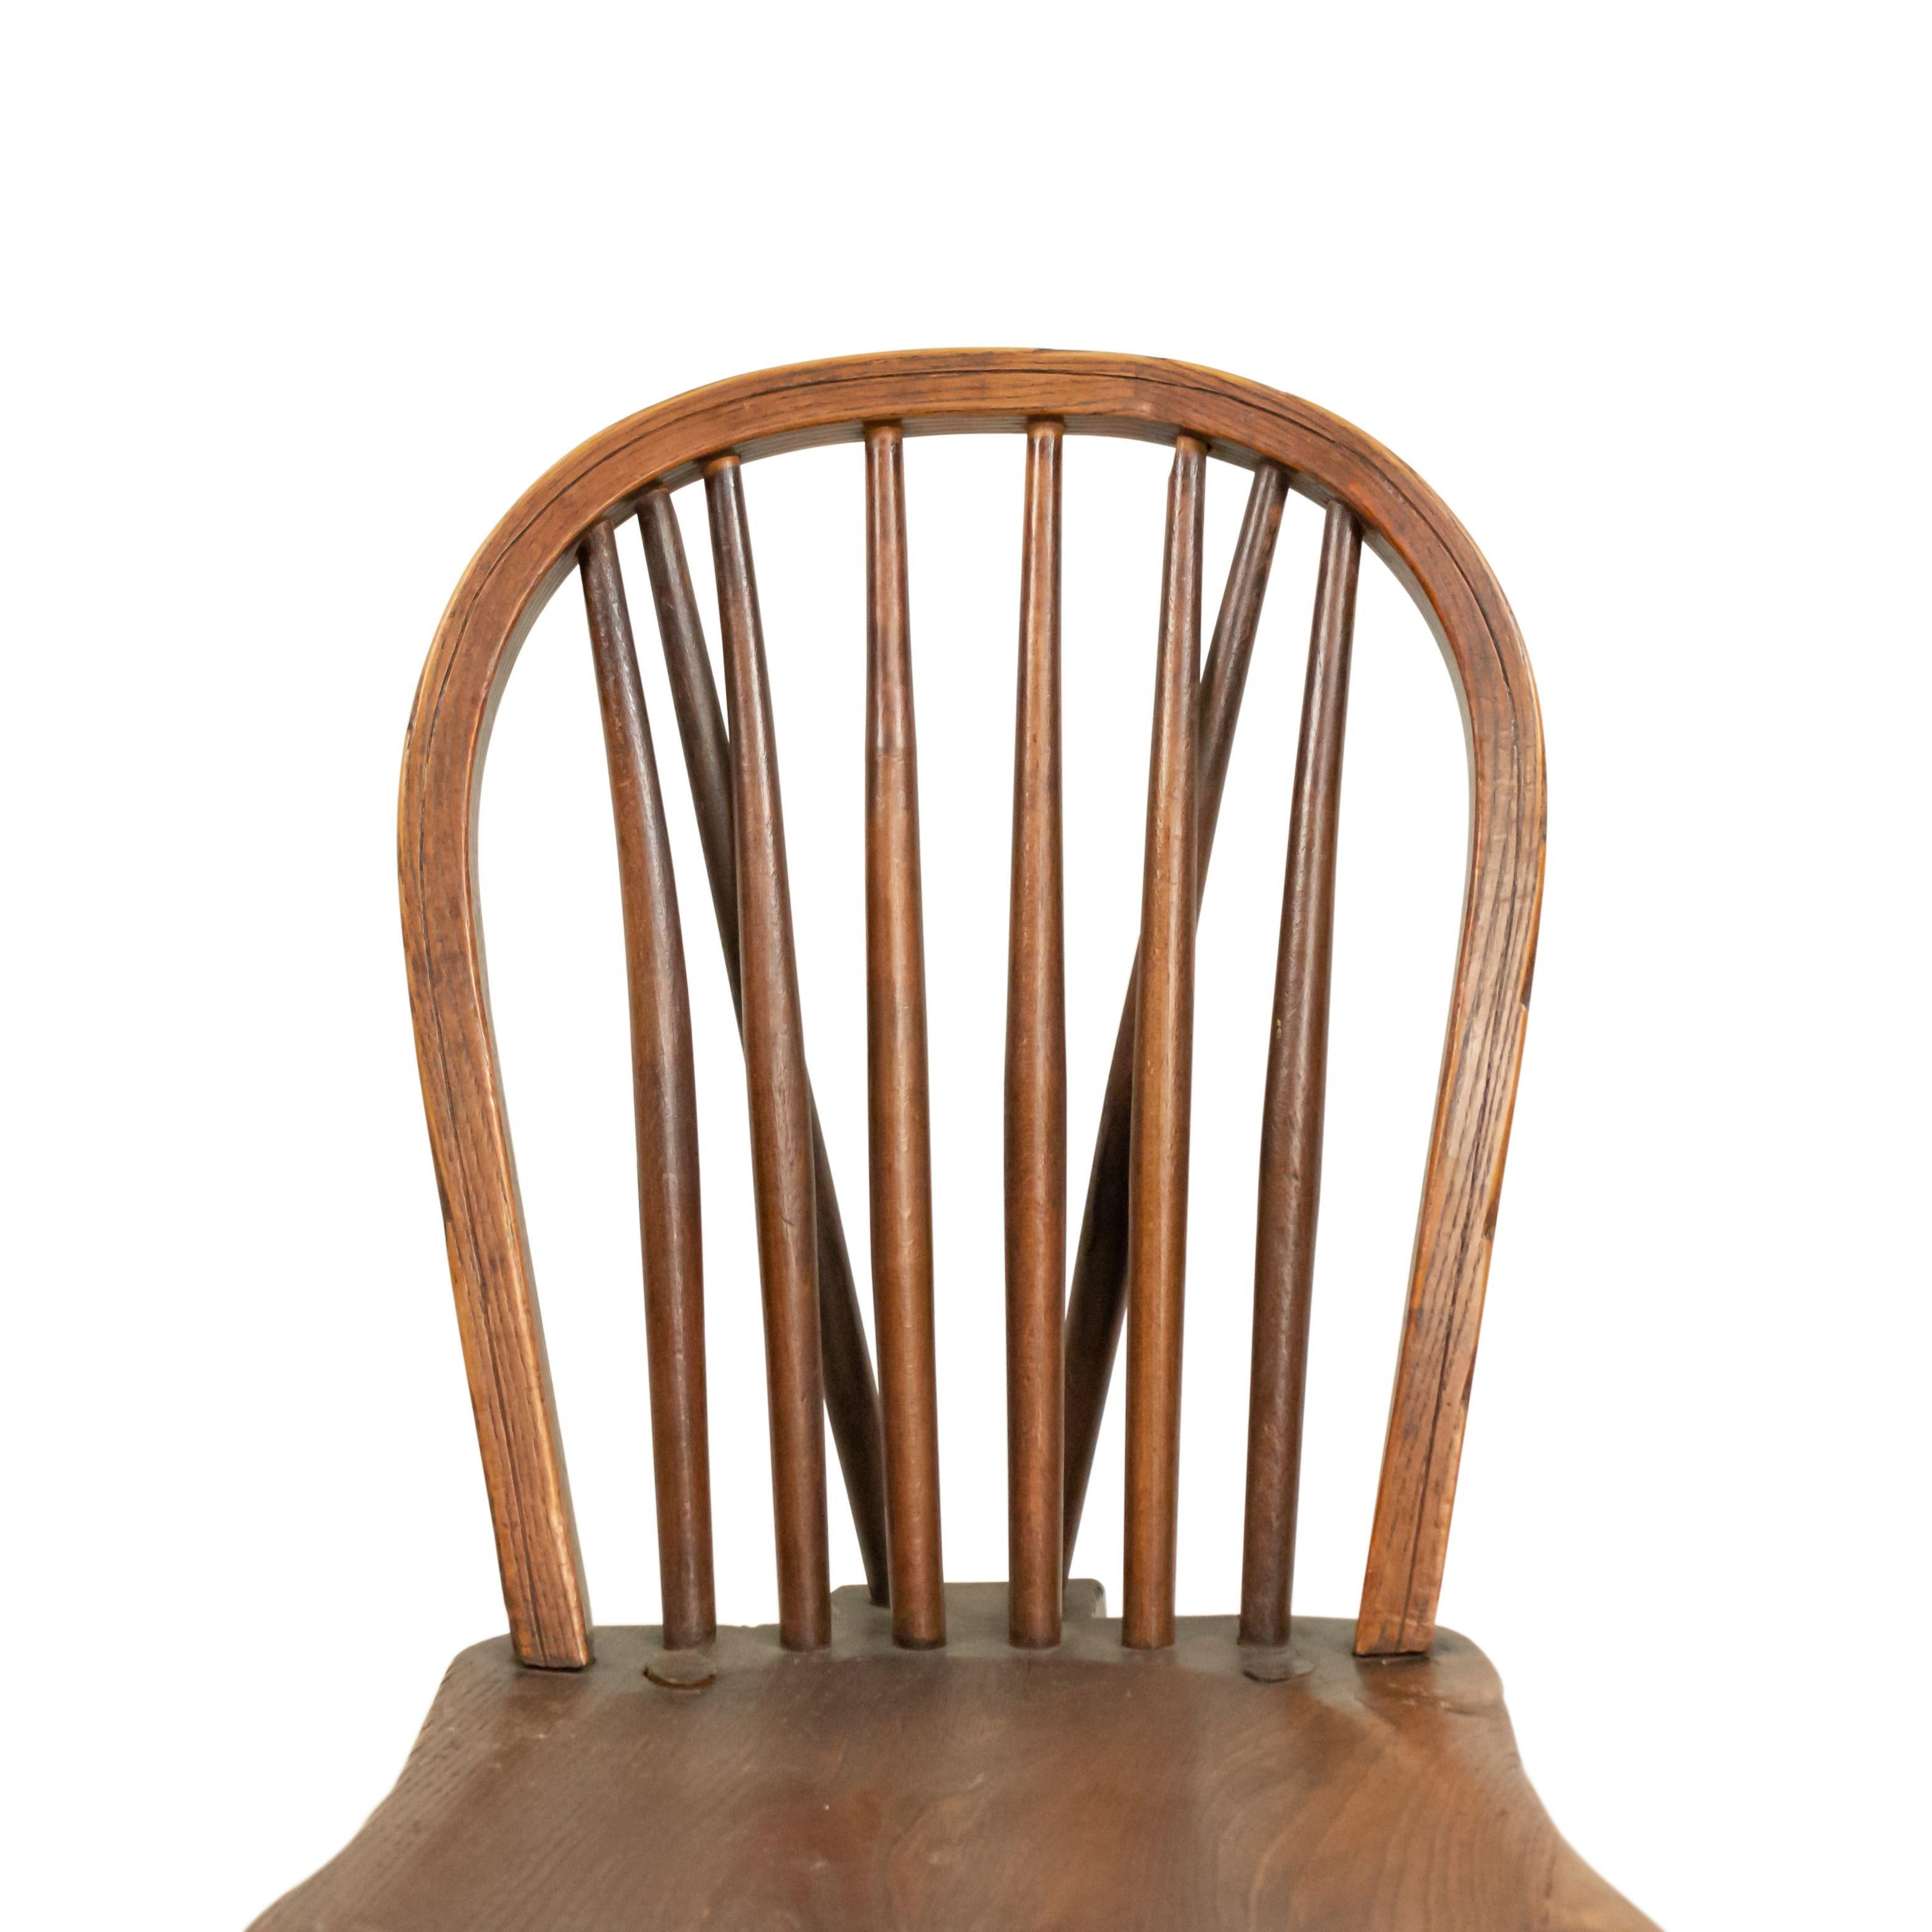 English Country antique walnut windsor side chair with spindle back. (19th Cent.).
 